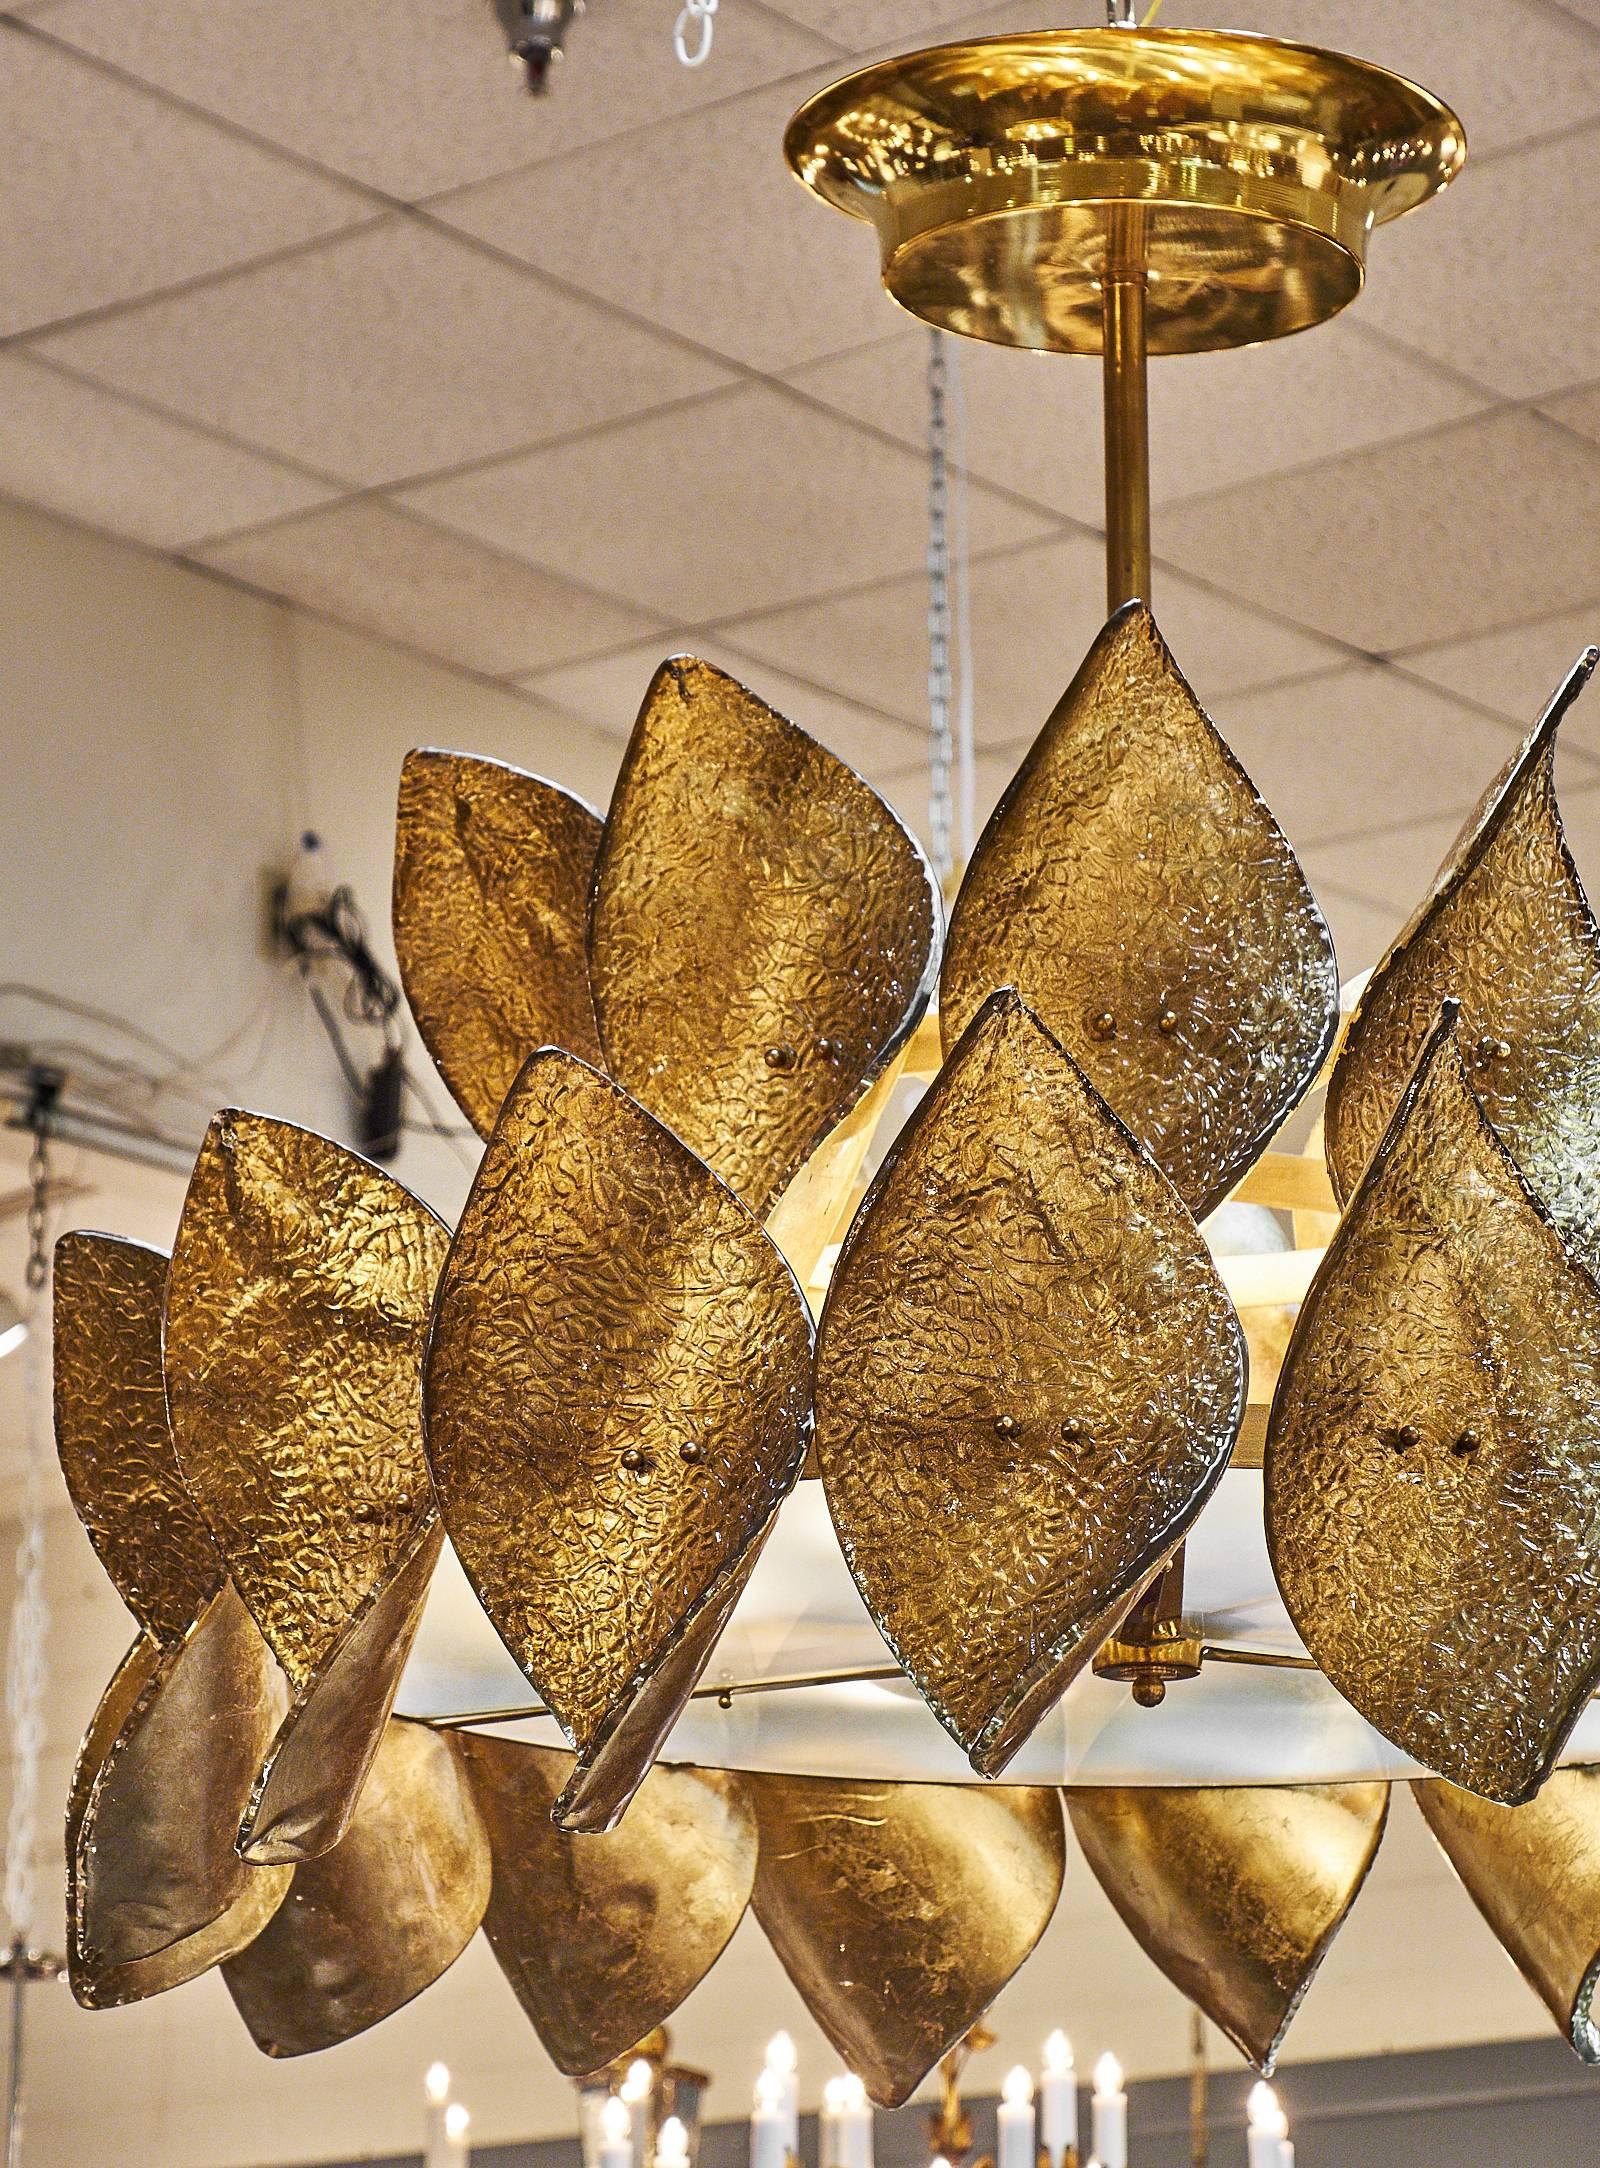 Murano Glass “Virgole” Modernist Chandelier In Excellent Condition For Sale In Austin, TX